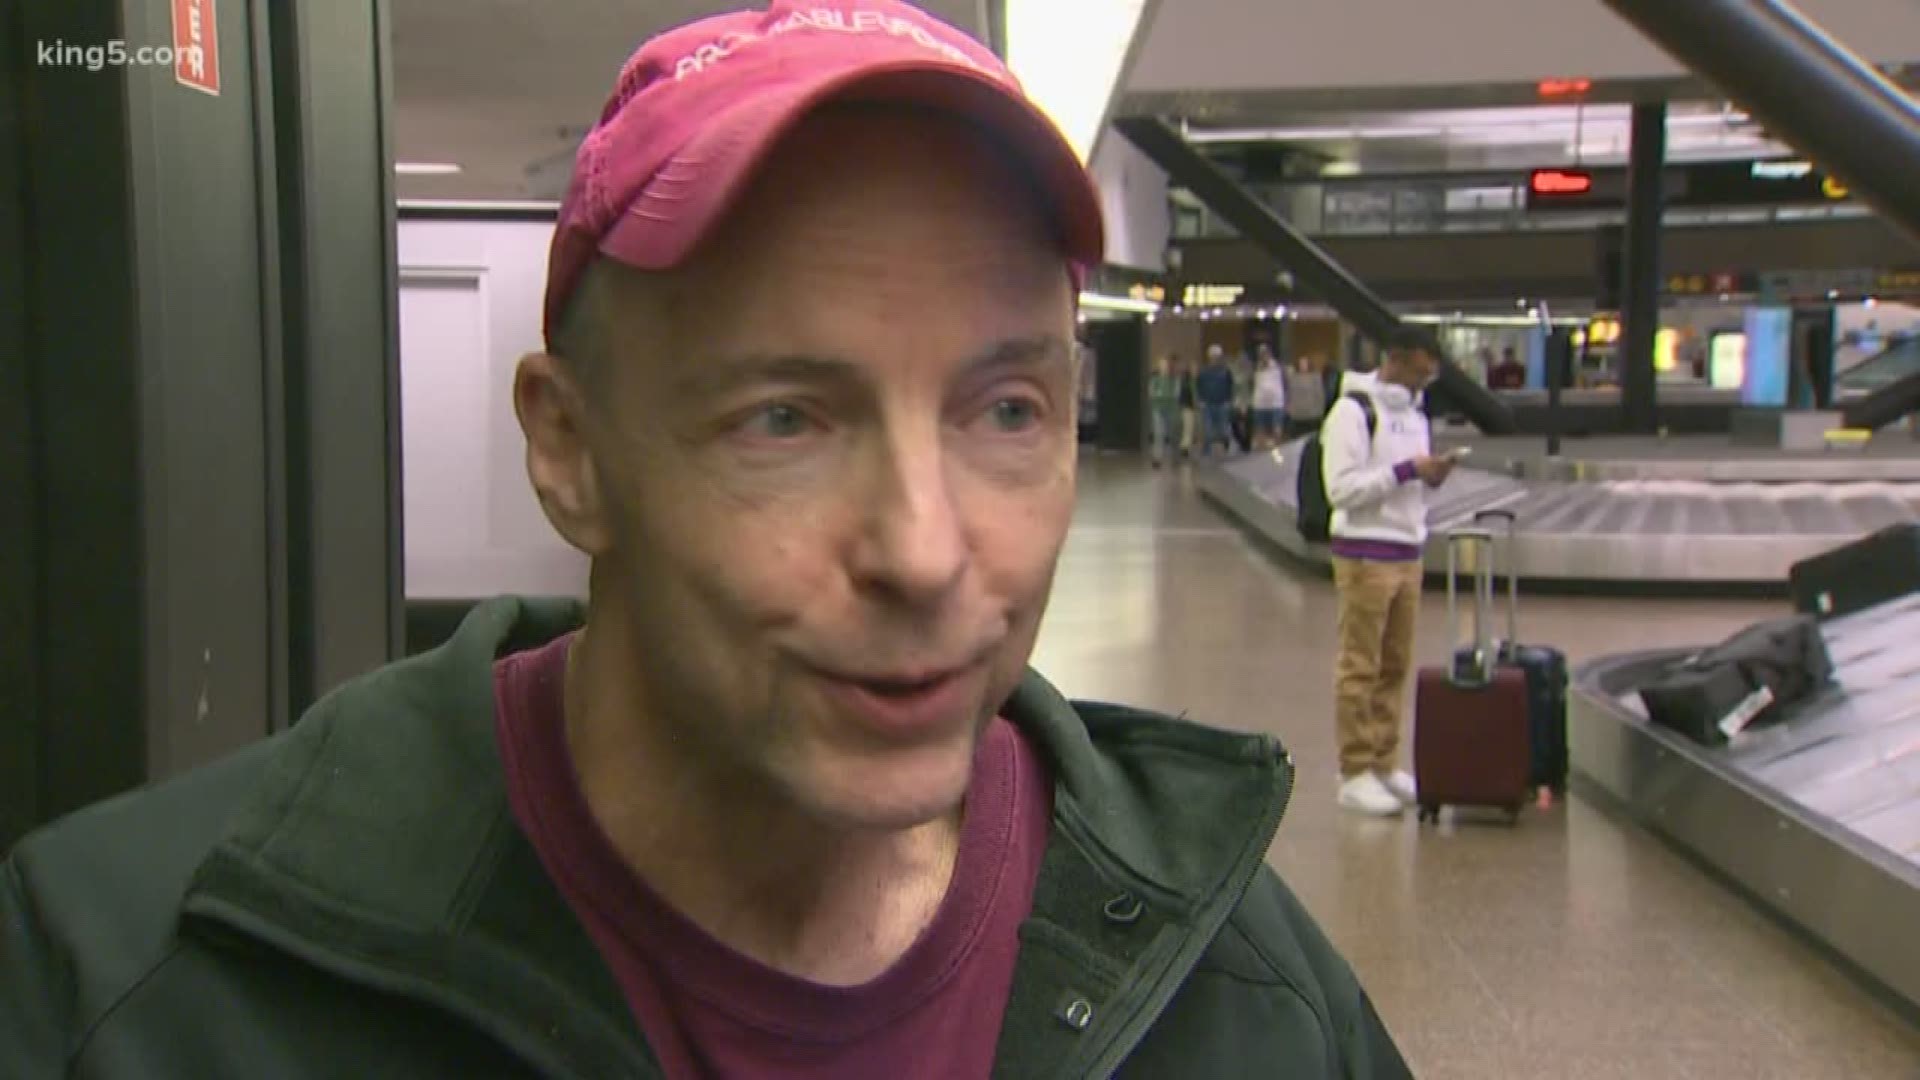 Frank King, quarantined overseas because of covid-19, landed at Sea-Tac airport tonight with no quarantine restrictions.